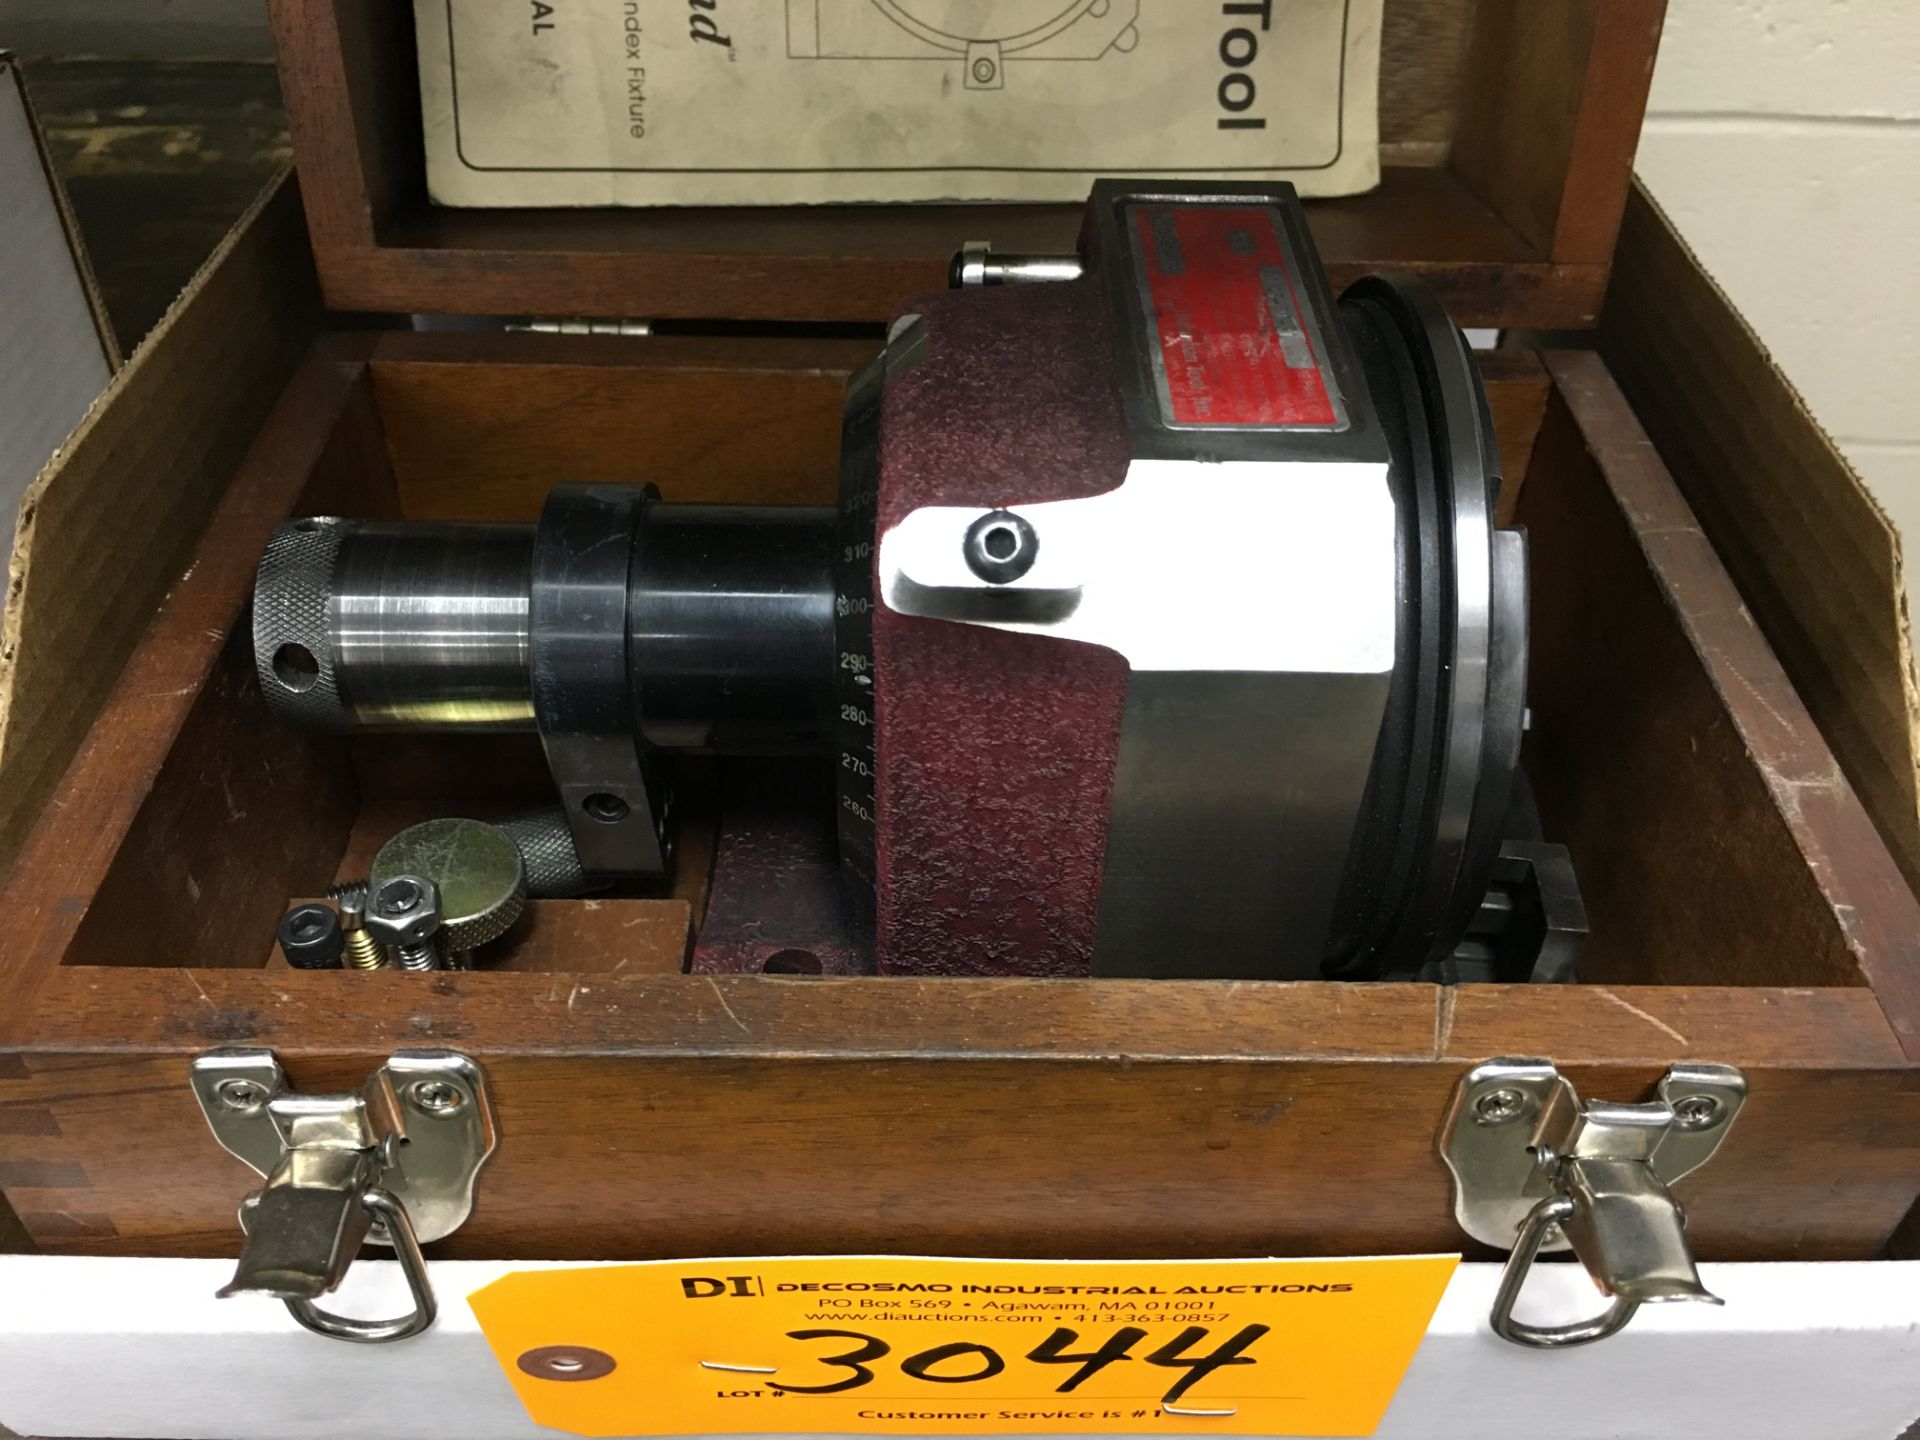 SUBURBAN #MG-5CV-S1 (5C) MASTER GRIND SPINNER INDEXER